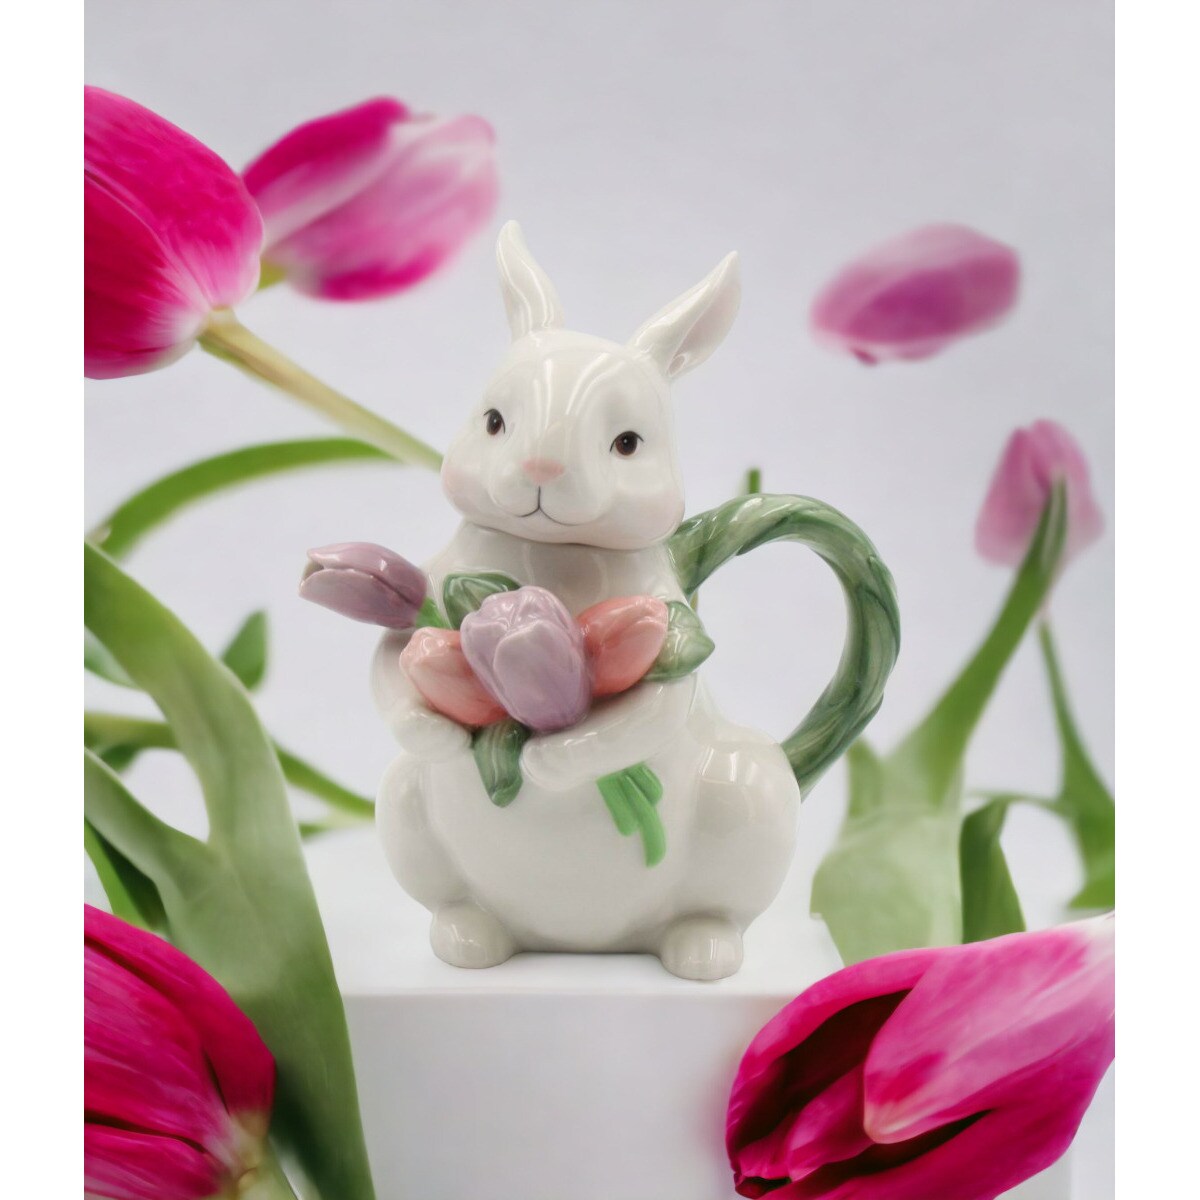 kevinsgiftshoppe Ceramic Easter Rabbit with Tulip Flowers Teapot   Tea Party Decor Cafe Decor